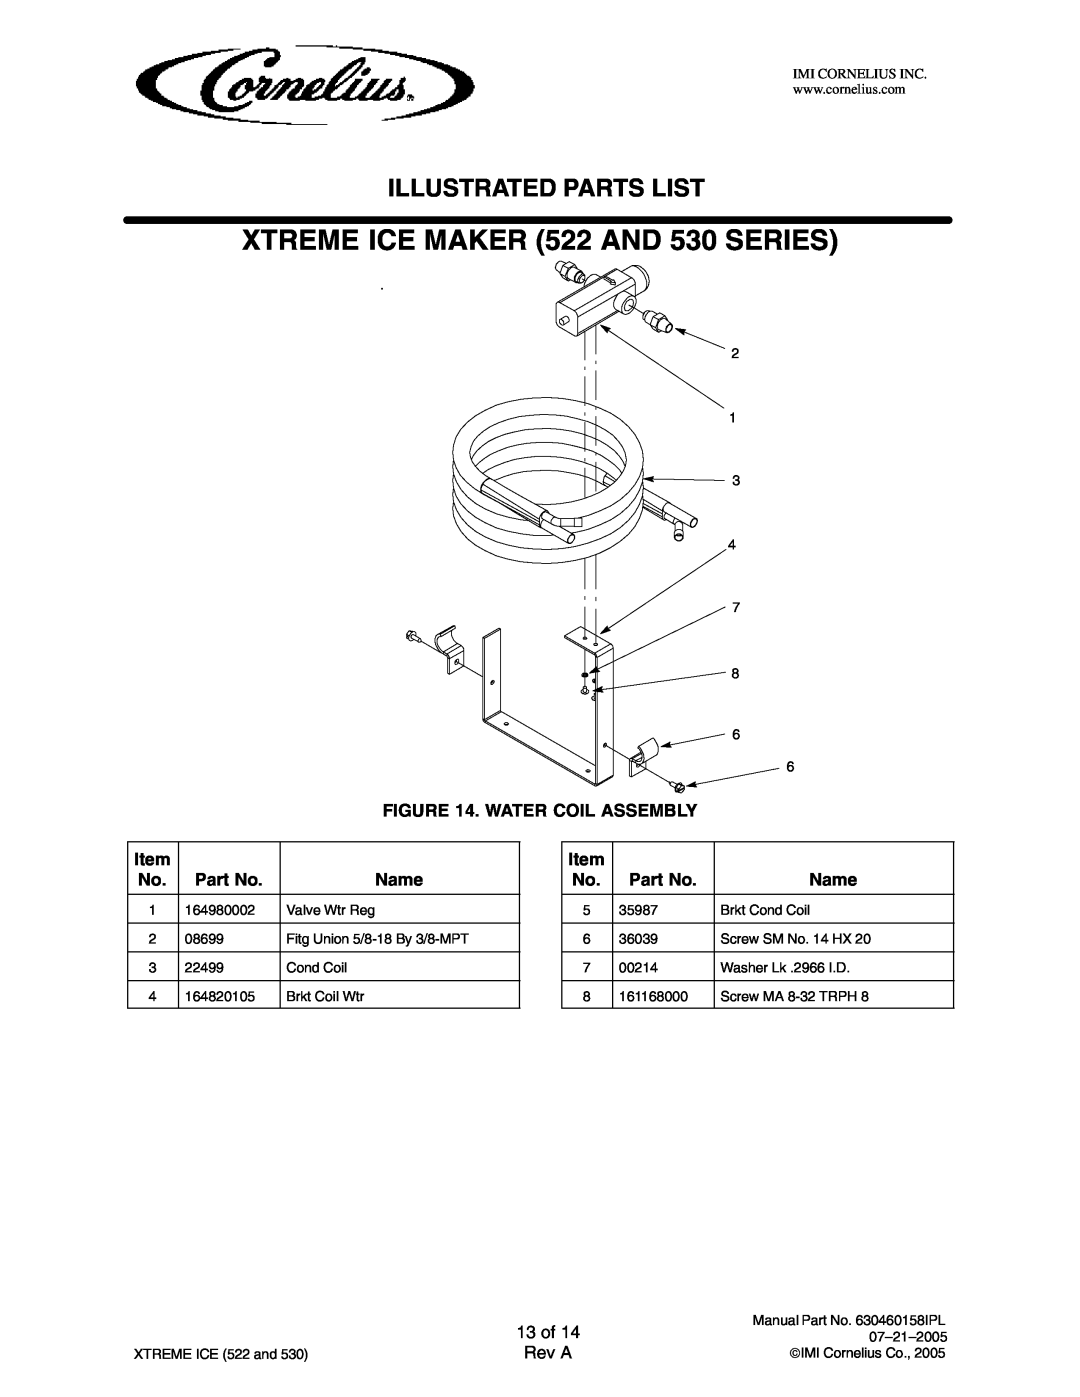 Cornelius 631805021 Water Coil Assembly, 13 of, XTREME ICE MAKER 522 AND 530 SERIES, Illustrated Parts List, Name, Rev A 